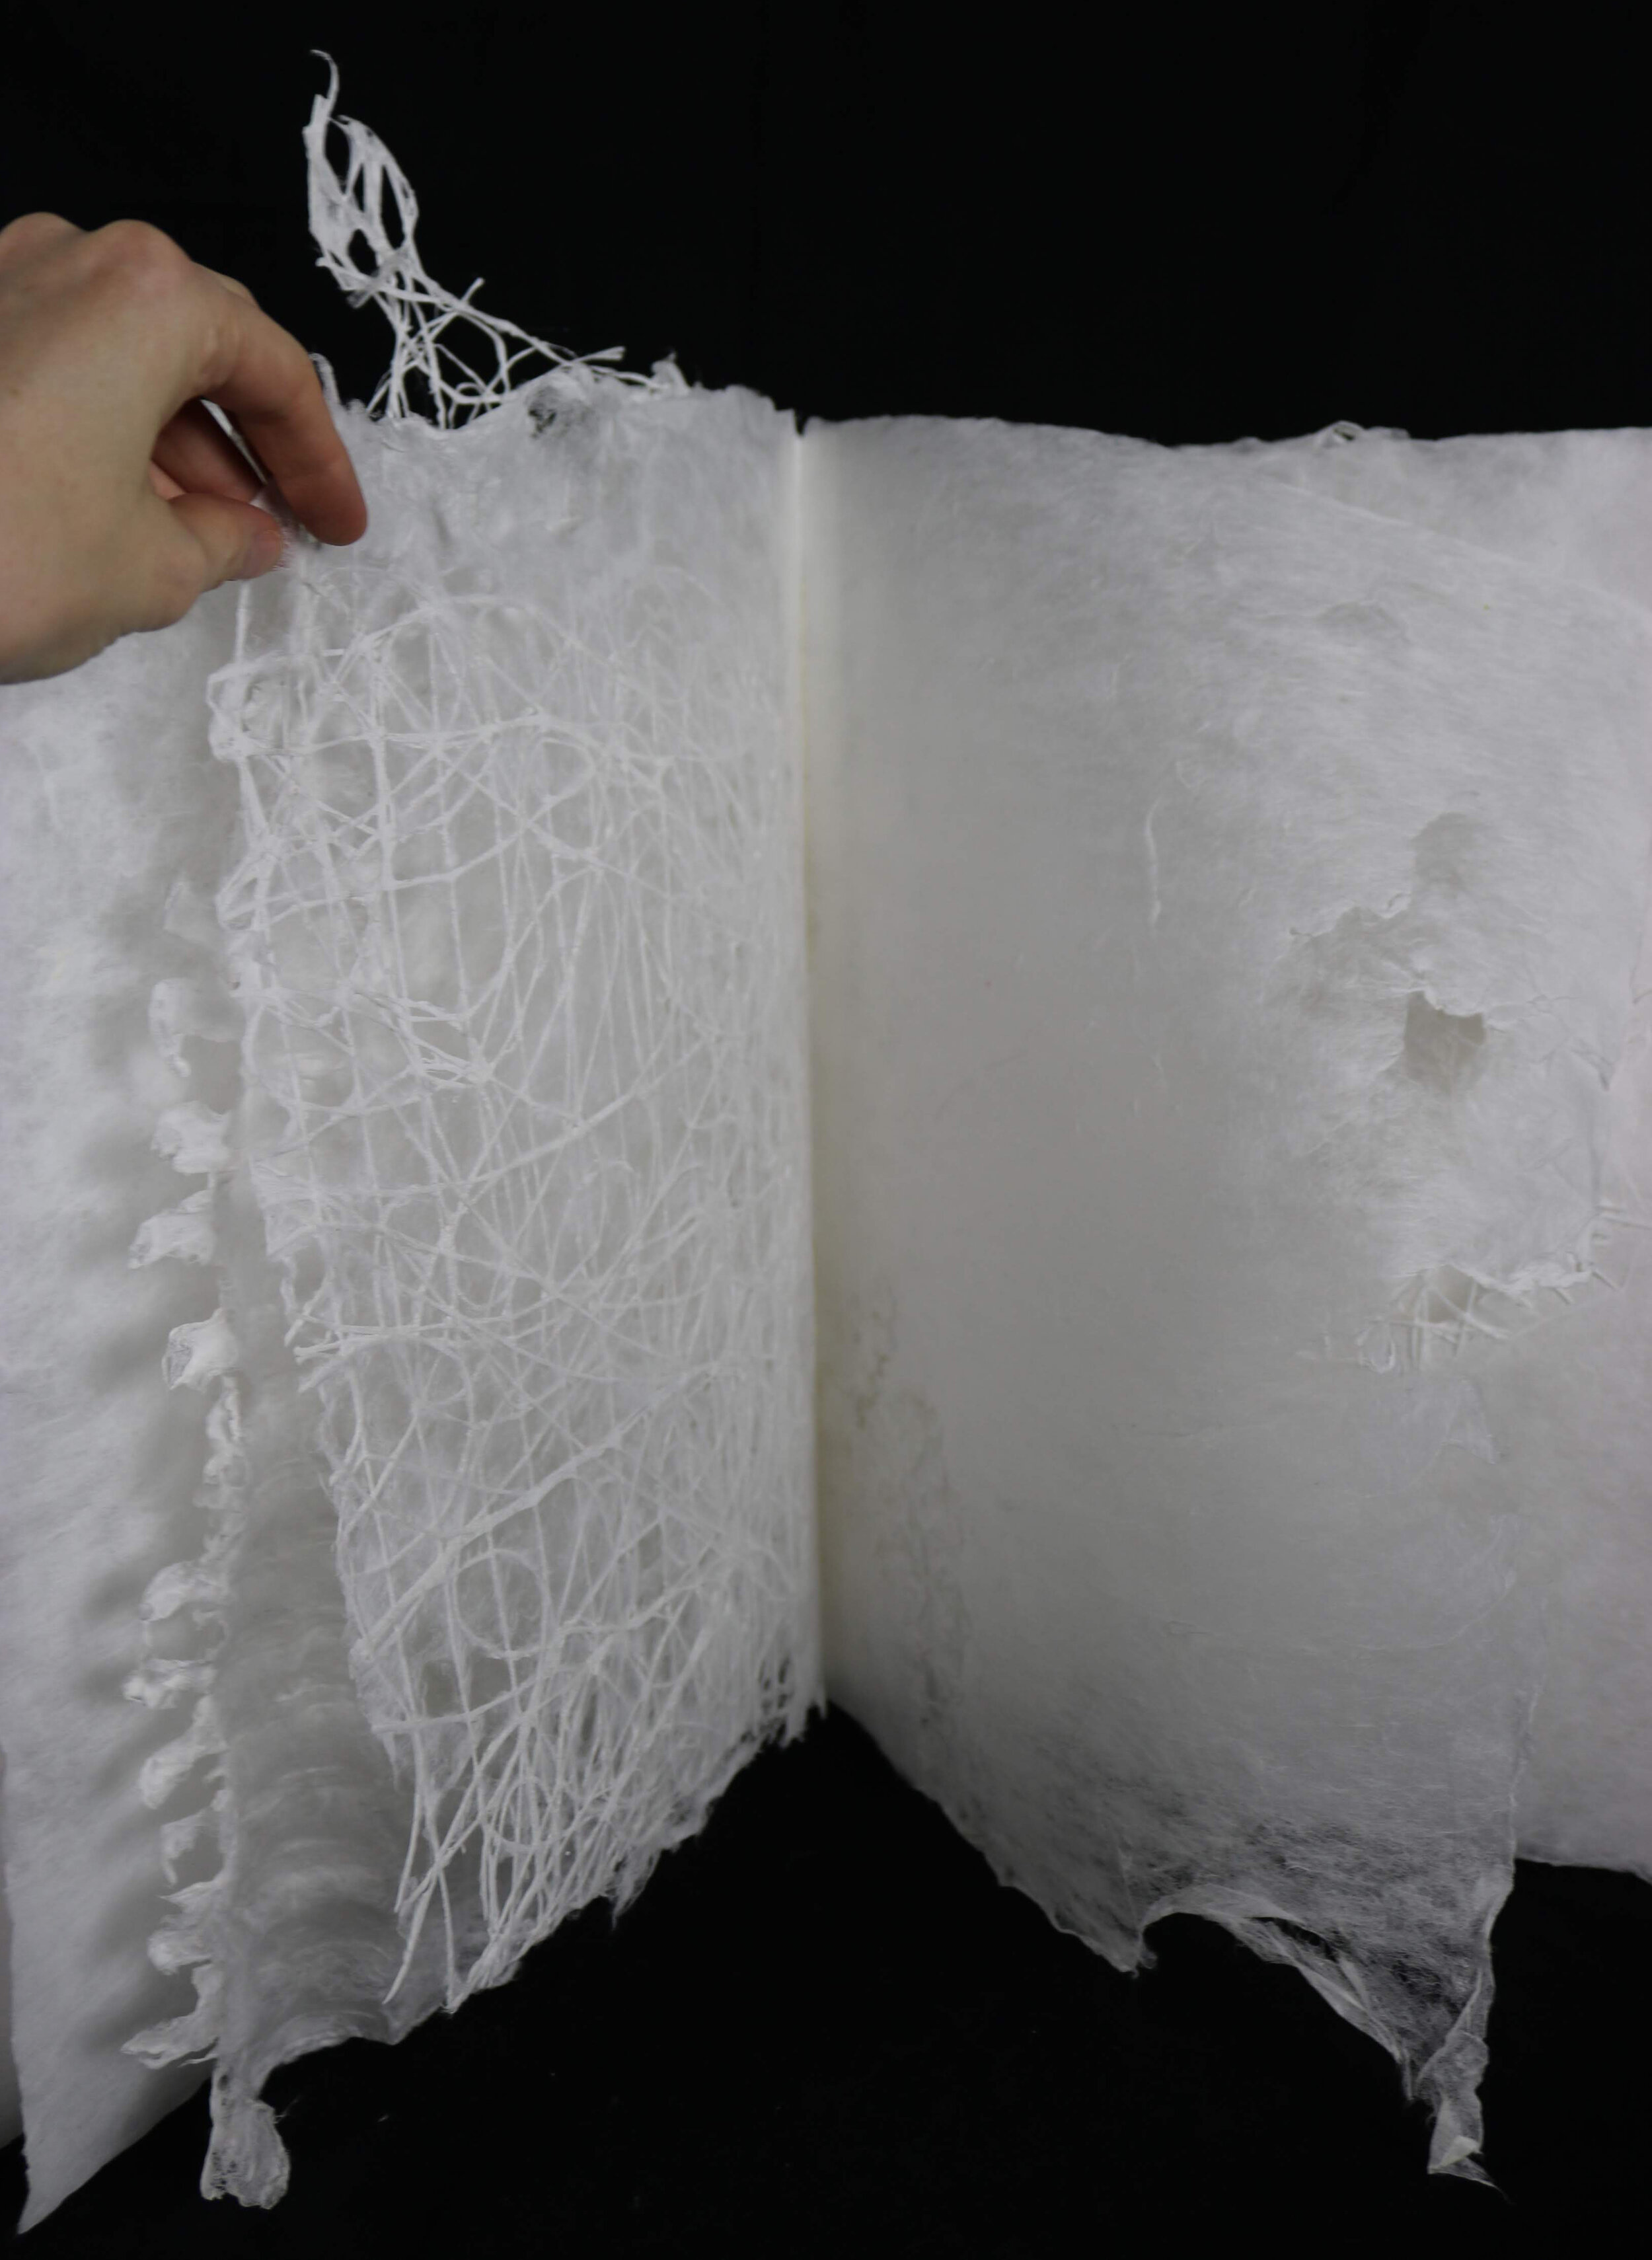   Dua , 2019, unique artist book, cotton and kozo, 18” x 13.5” x 2”. Housed at the University of Miami Special Collections.      